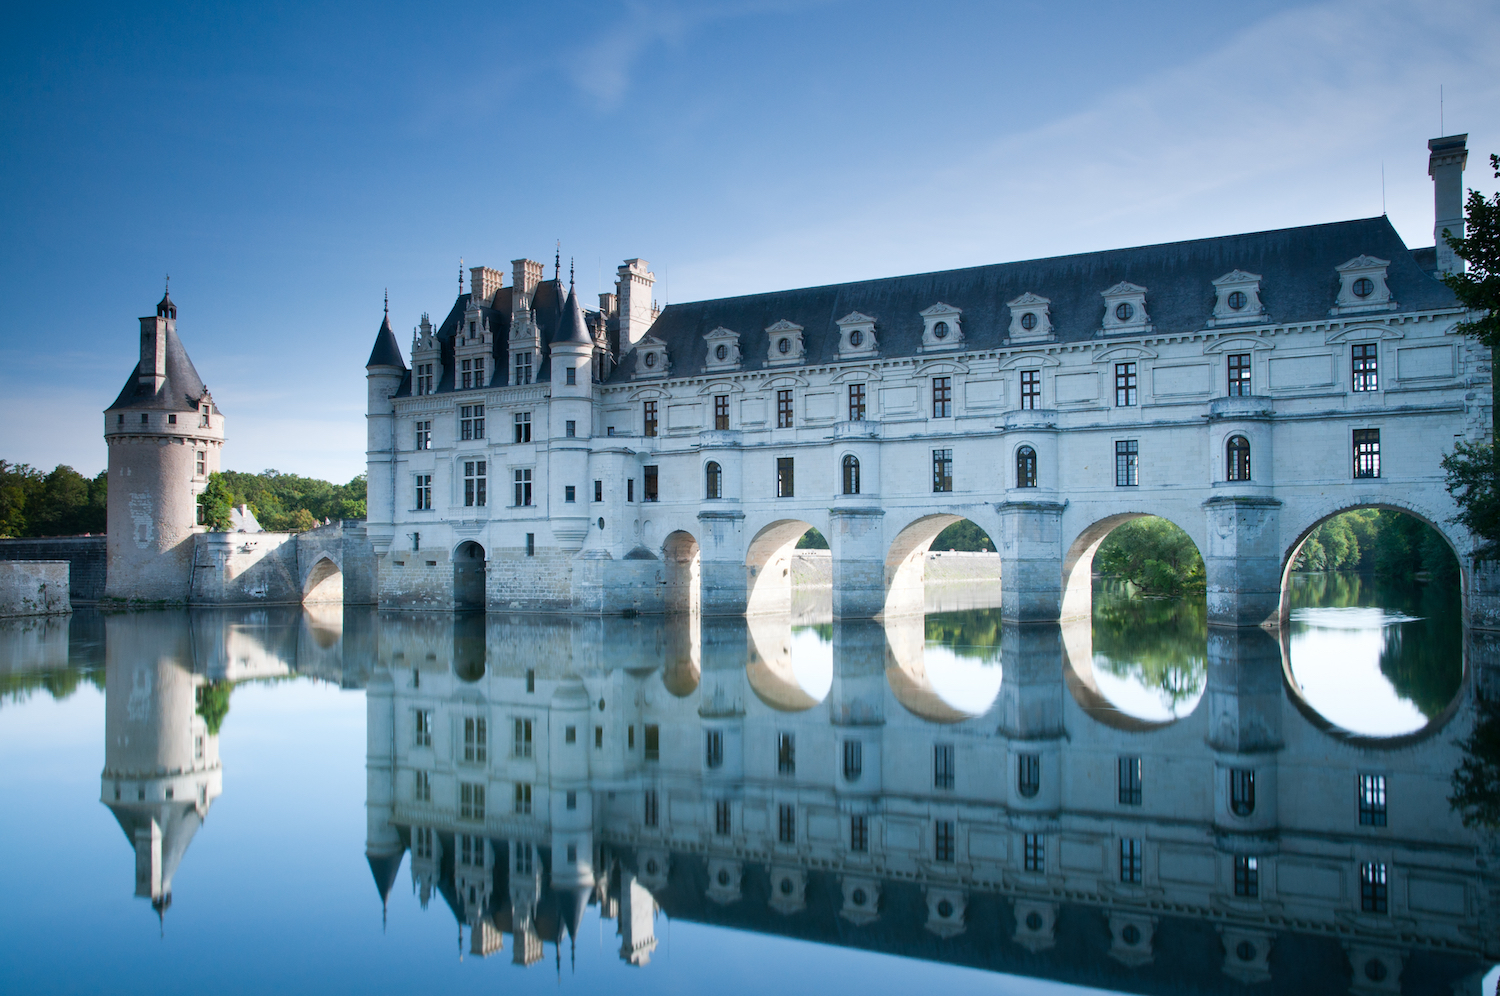 The chateau of Chenonceau in the Loire Valley